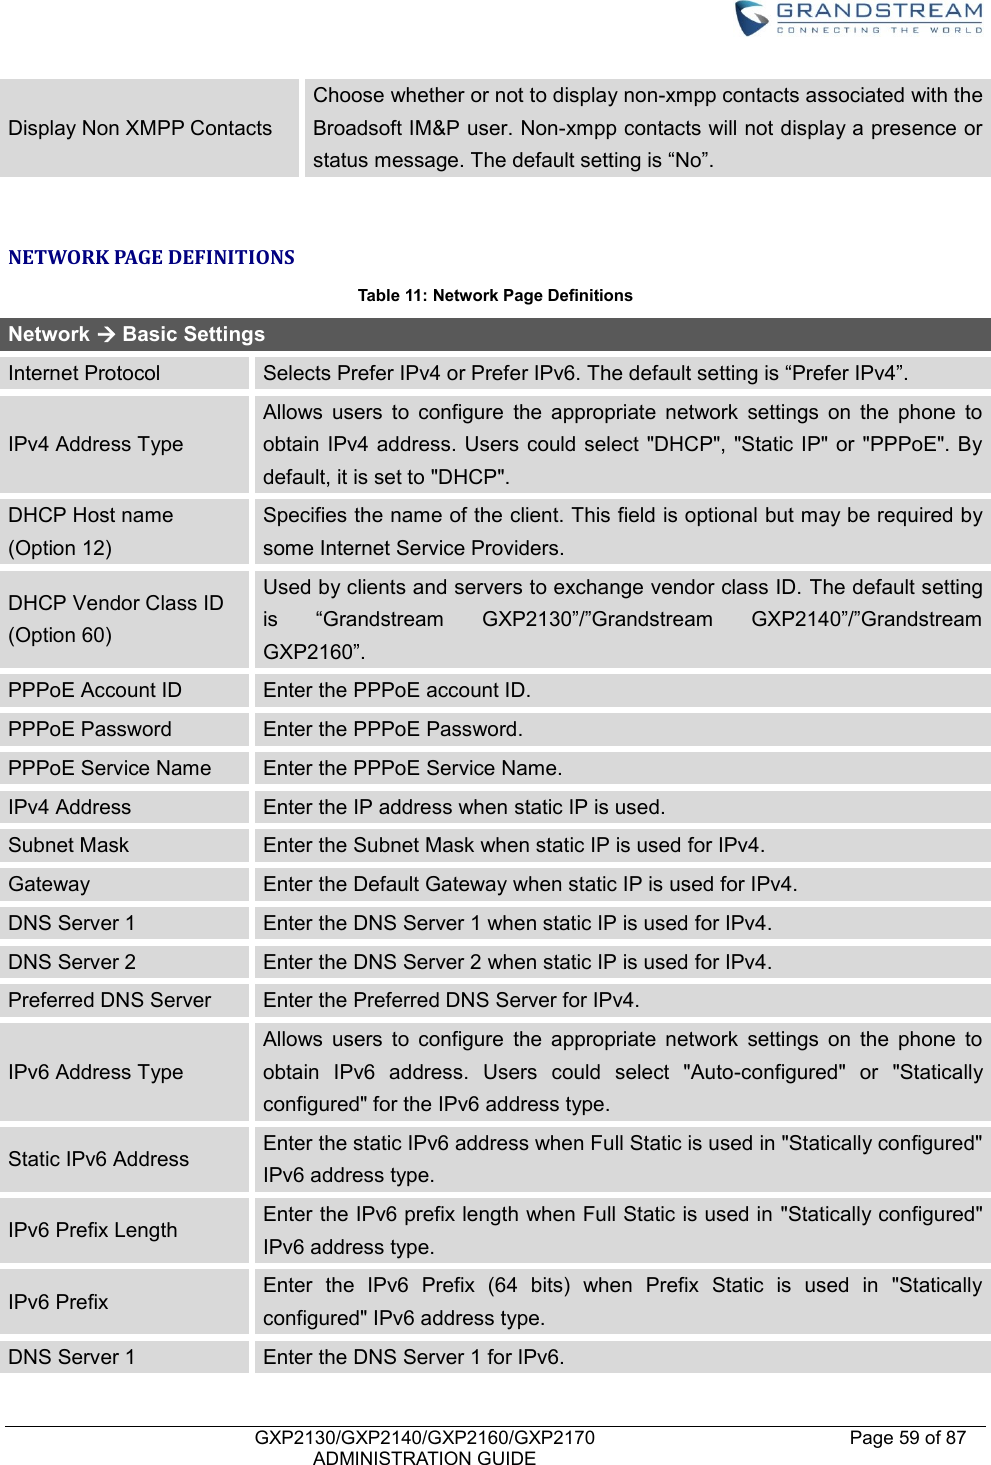    GXP2130/GXP2140/GXP2160/GXP2170   ADMINISTRATION GUIDE Page 59 of 87     Display Non XMPP Contacts Choose whether or not to display non-xmpp contacts associated with the Broadsoft IM&amp;P user. Non-xmpp contacts will not display a presence or status message. The default setting is “No”.  NETWORK PAGE DEFINITIONS Table 11: Network Page Definitions Network  Basic Settings Internet Protocol Selects Prefer IPv4 or Prefer IPv6. The default setting is “Prefer IPv4”. IPv4 Address Type Allows  users  to  configure  the  appropriate  network  settings  on  the  phone  to obtain IPv4 address. Users could select  &quot;DHCP&quot;, &quot;Static IP&quot;  or &quot;PPPoE&quot;. By default, it is set to &quot;DHCP&quot;. DHCP Host name (Option 12) Specifies the name of the client. This field is optional but may be required by some Internet Service Providers.   DHCP Vendor Class ID   (Option 60) Used by clients and servers to exchange vendor class ID. The default setting is  “Grandstream  GXP2130”/”Grandstream  GXP2140”/”Grandstream GXP2160”. PPPoE Account ID Enter the PPPoE account ID. PPPoE Password Enter the PPPoE Password. PPPoE Service Name Enter the PPPoE Service Name. IPv4 Address Enter the IP address when static IP is used. Subnet Mask Enter the Subnet Mask when static IP is used for IPv4. Gateway Enter the Default Gateway when static IP is used for IPv4. DNS Server 1 Enter the DNS Server 1 when static IP is used for IPv4. DNS Server 2 Enter the DNS Server 2 when static IP is used for IPv4. Preferred DNS Server Enter the Preferred DNS Server for IPv4. IPv6 Address Type Allows  users  to  configure  the  appropriate  network  settings  on  the  phone  to obtain  IPv6  address.  Users  could  select  &quot;Auto-configured&quot;  or  &quot;Statically configured&quot; for the IPv6 address type. Static IPv6 Address Enter the static IPv6 address when Full Static is used in &quot;Statically configured&quot; IPv6 address type. IPv6 Prefix Length Enter the IPv6 prefix length when Full Static is used in &quot;Statically configured&quot; IPv6 address type. IPv6 Prefix Enter  the  IPv6  Prefix  (64  bits)  when  Prefix  Static  is  used  in  &quot;Statically configured&quot; IPv6 address type. DNS Server 1 Enter the DNS Server 1 for IPv6. 